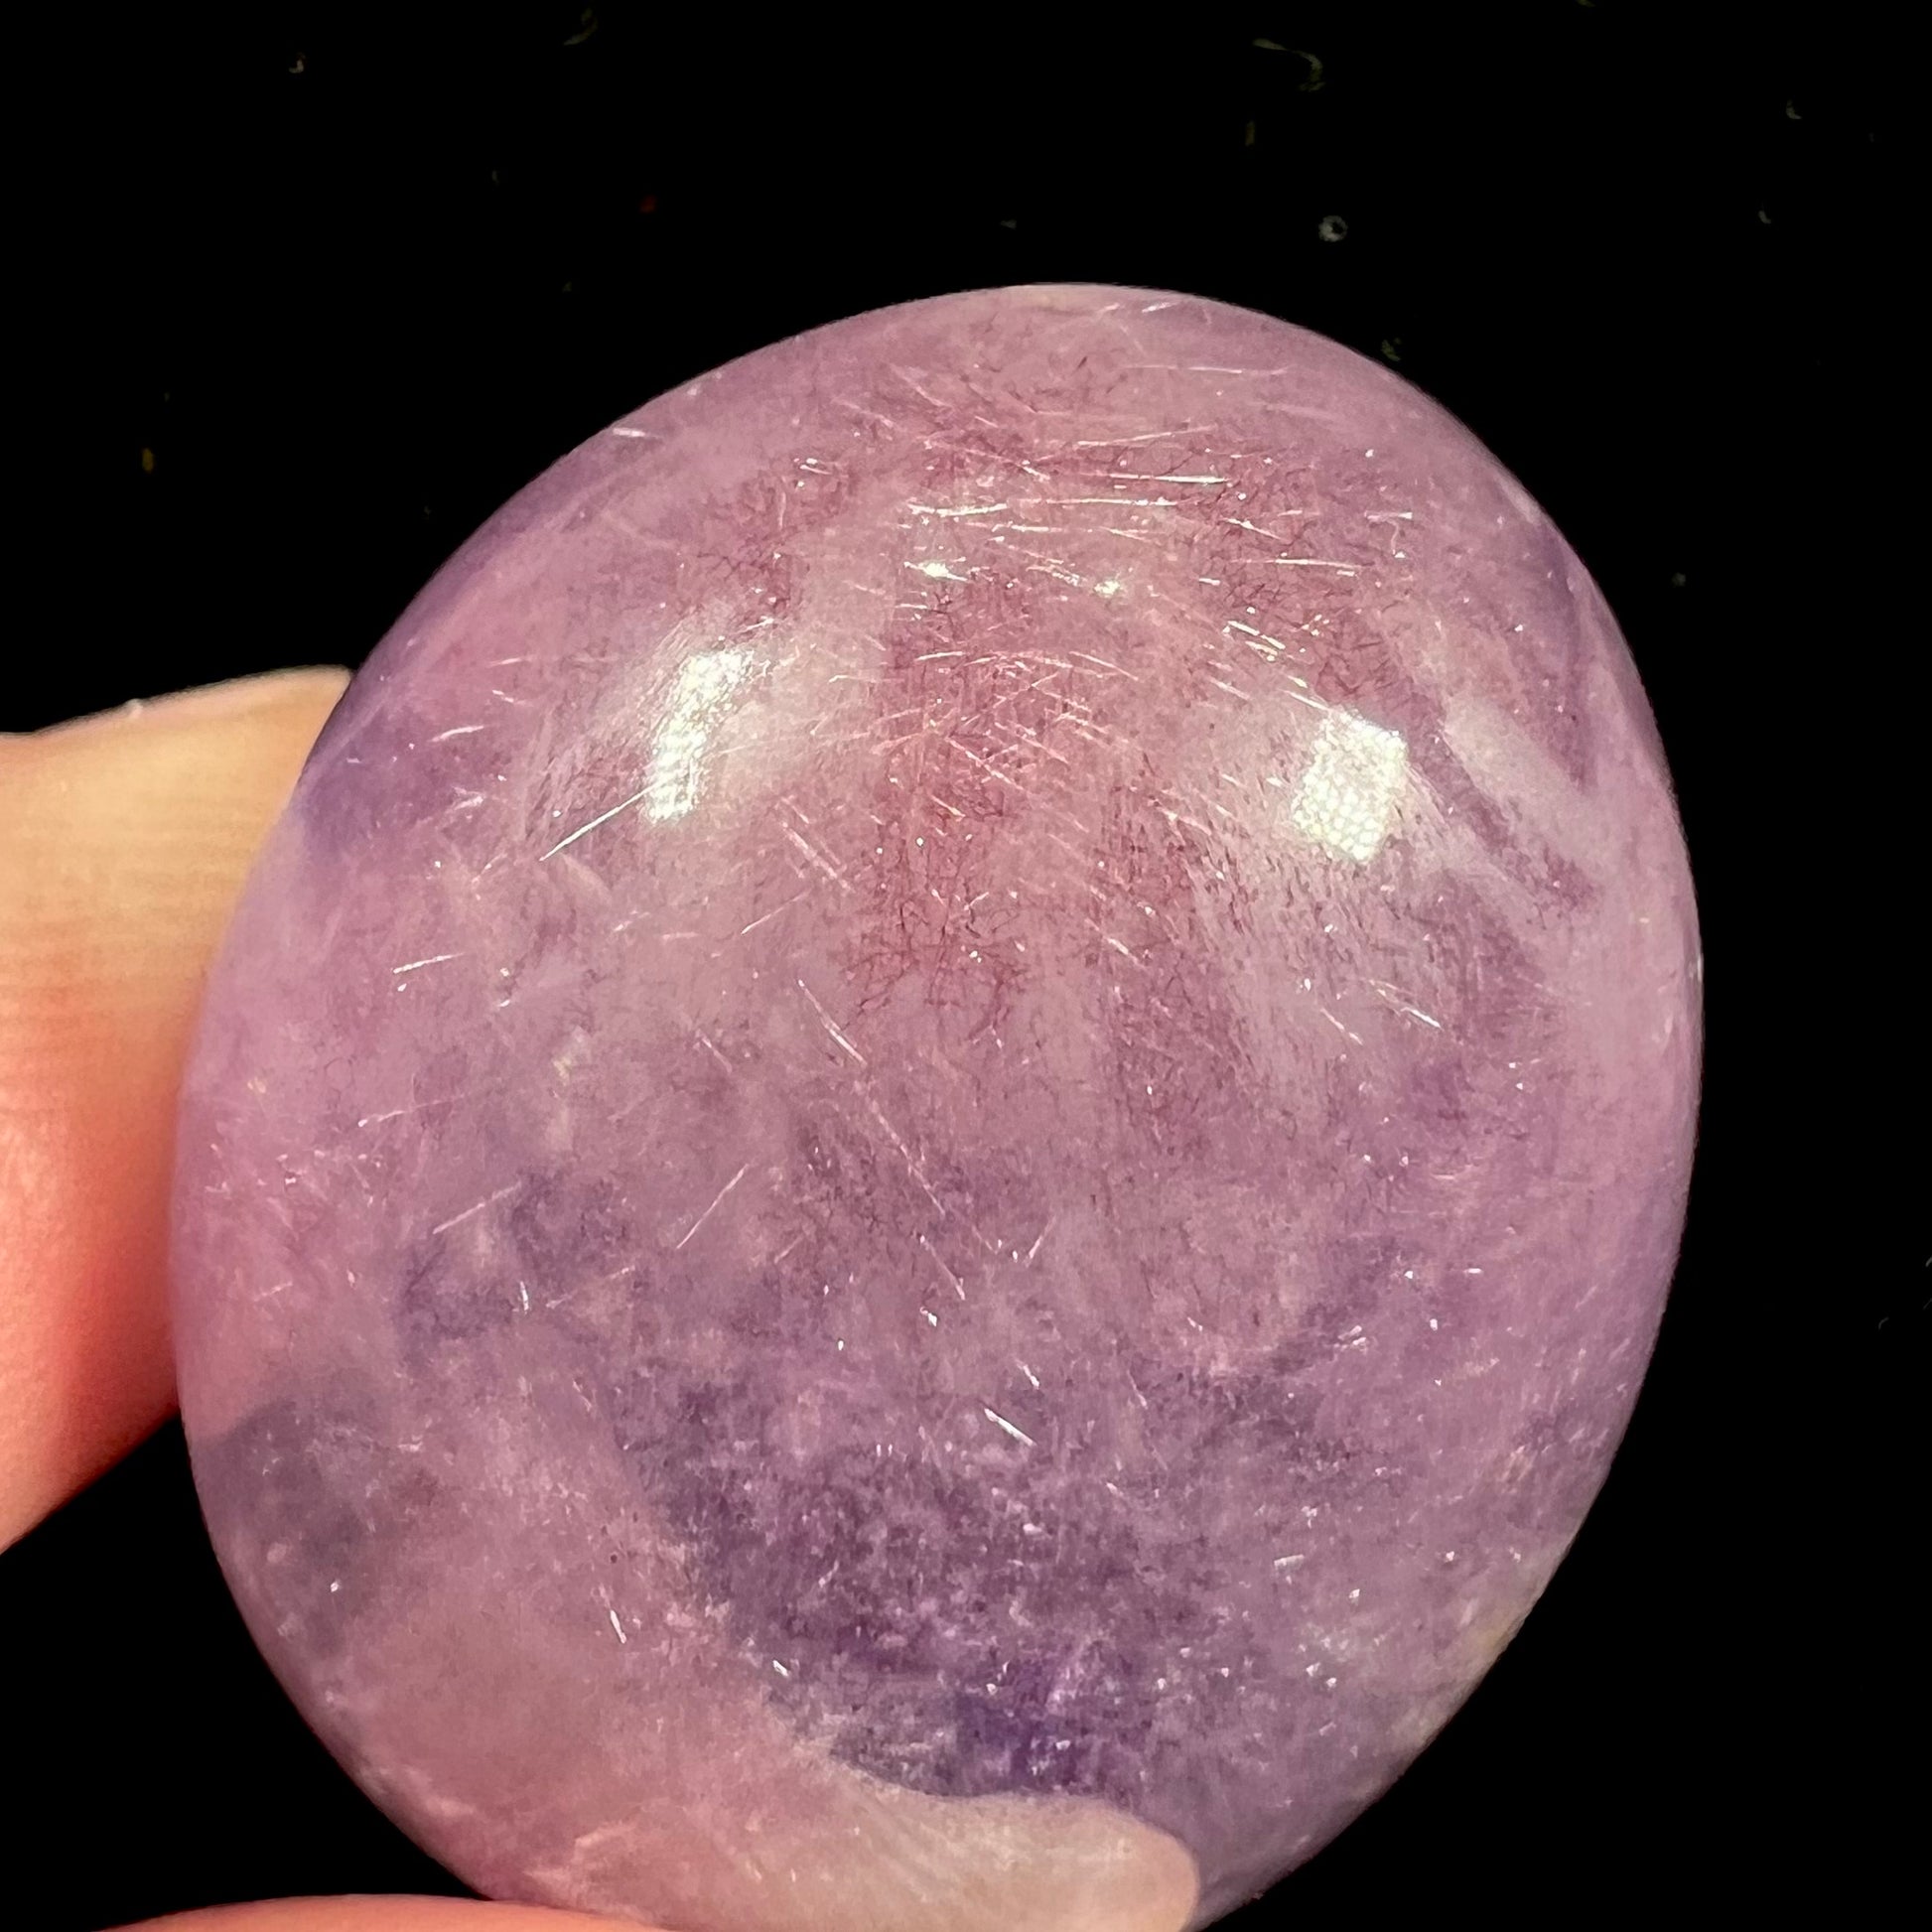 A cabochon cut red amethyst stone from Mexico.  The piece shows a faint star.